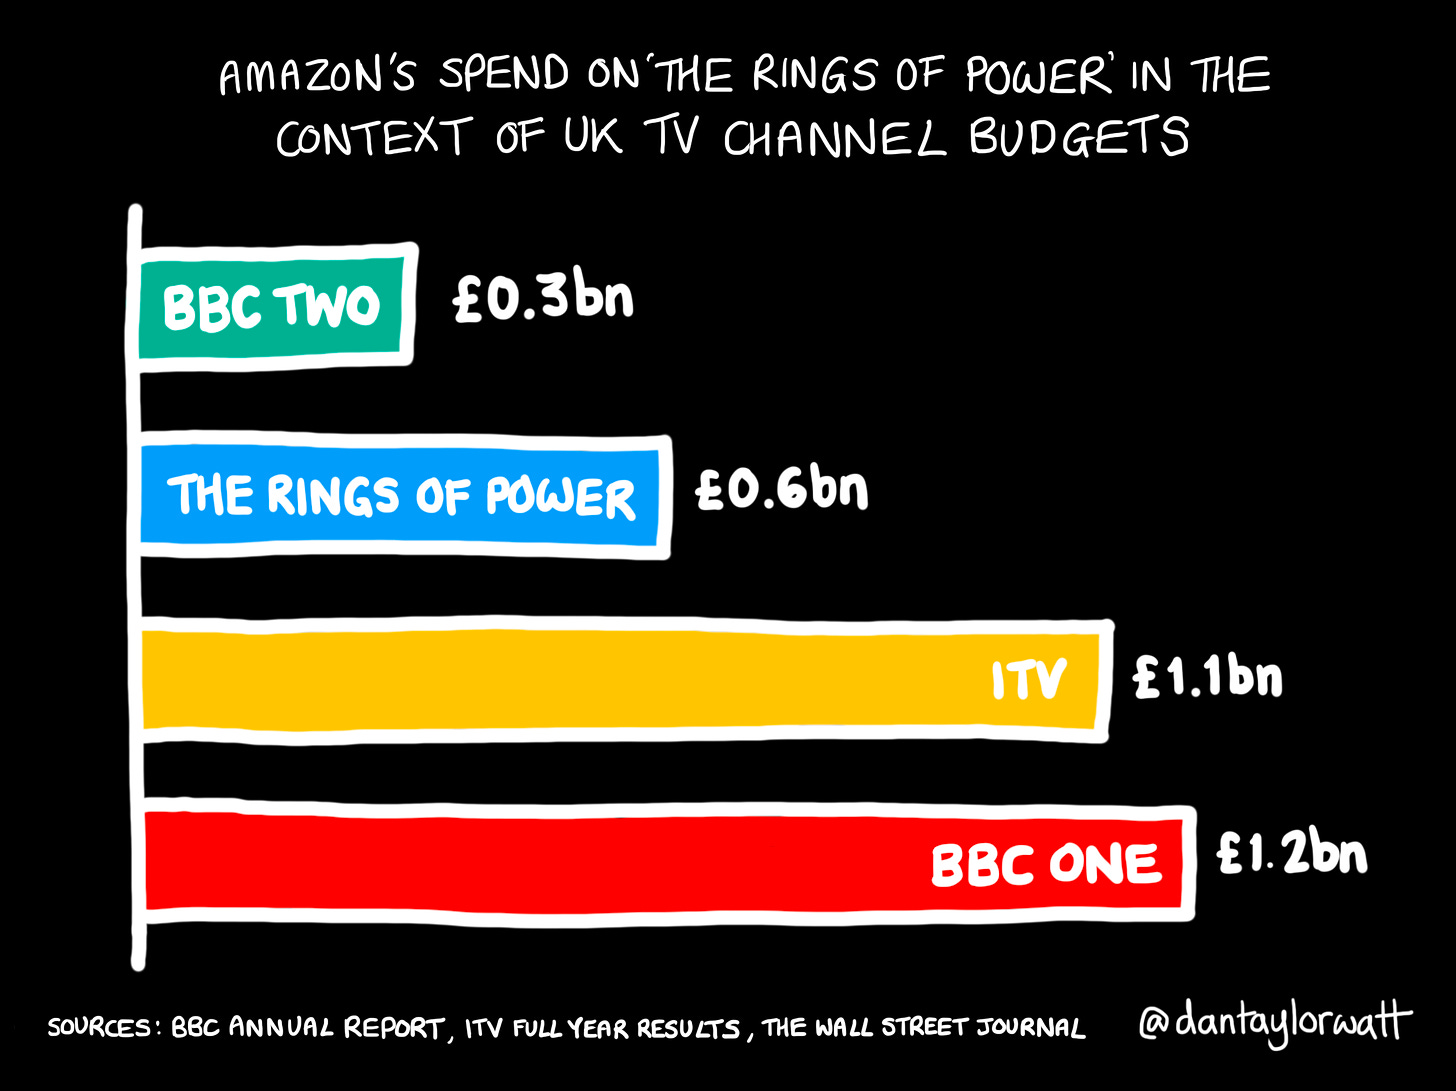 Bar chart showing Amazon’s spend on The Rings of Power relative to the annual programming budgets for BBC TWO, ITV & BBC ONE